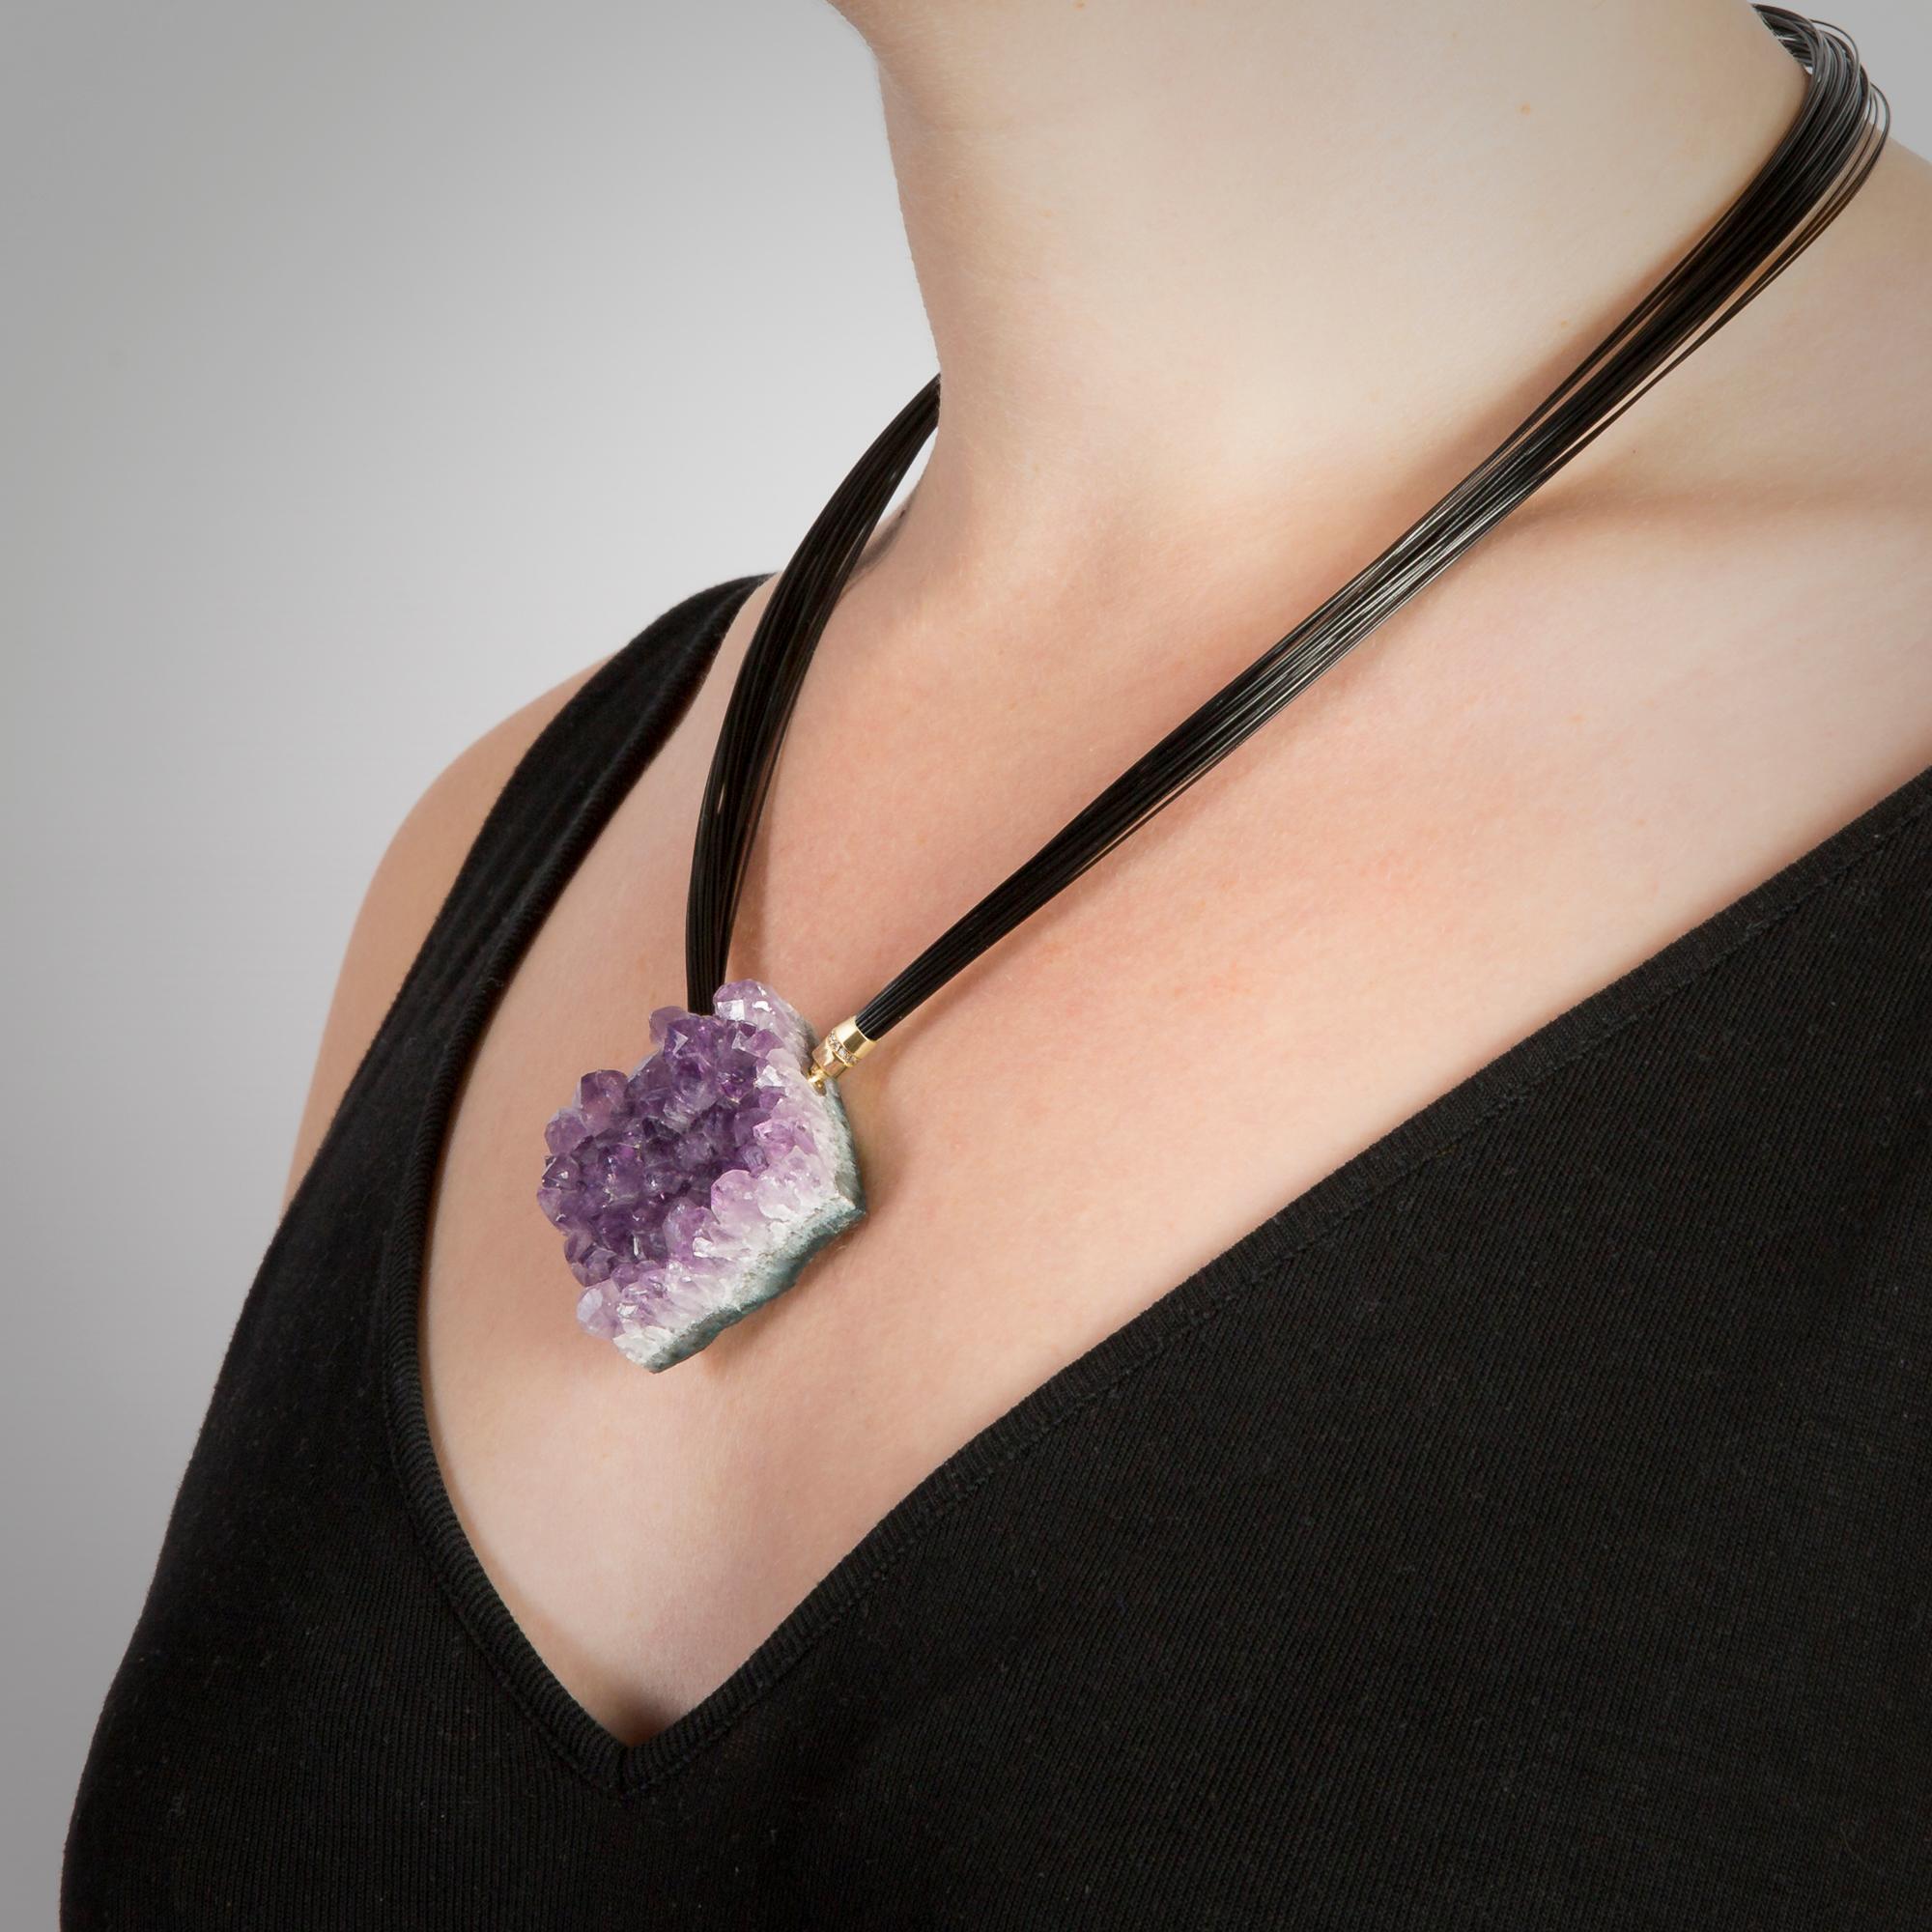 This unique Amethyst necklace is made of a single impressive piece of Amethyst geode which is fixed onto a multi strand black cable by two diamond set 18 Karat Gold bayonet clasps. 

Made by hand in our family run Northern Irish jewellery workshop.